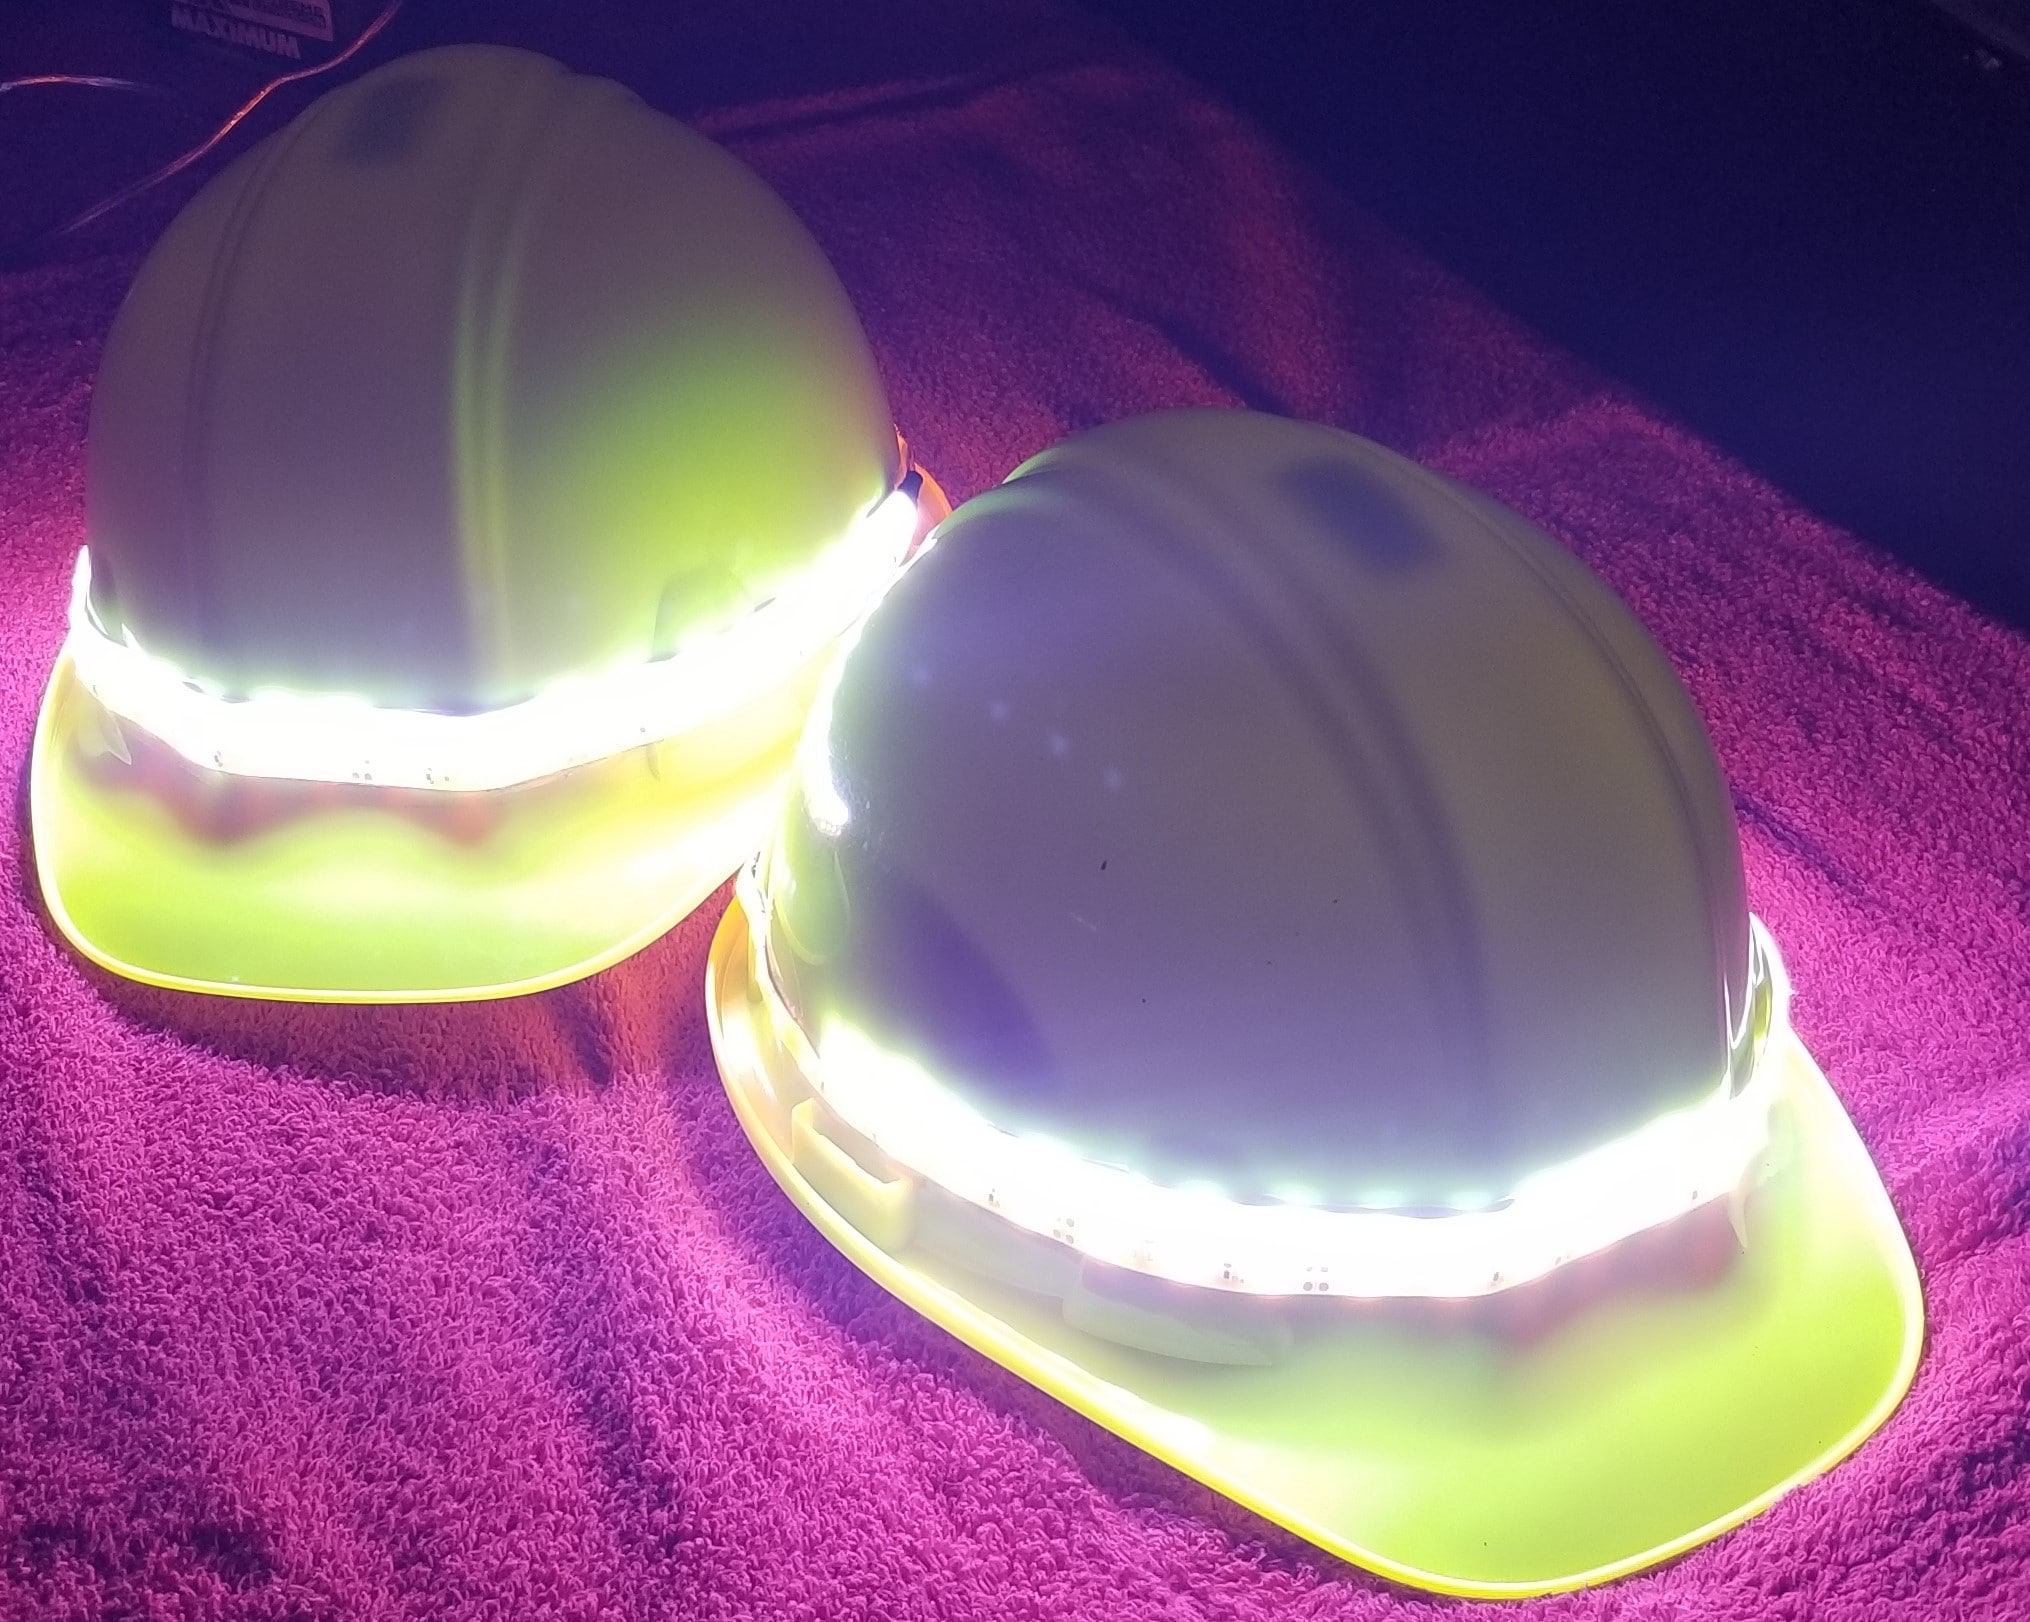 TCP lime green hard hat, outfitted with the SeeMe--Now Led Light system